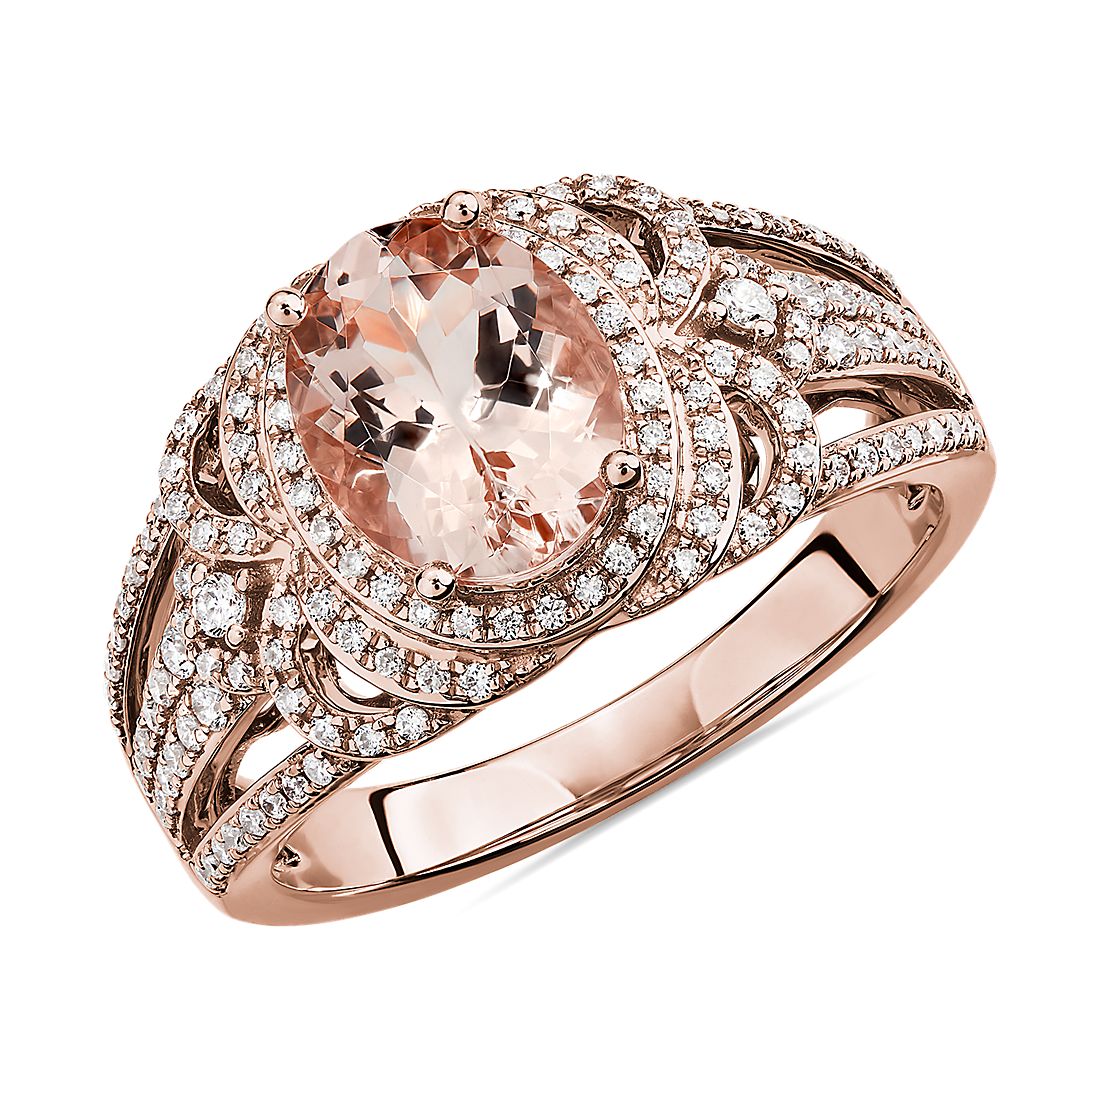 Halo Ring Wedding Ring, Ring For Her 1.5 CT 14k Rose Gold Oval Morganite Diamond Halo Engagement Ring Art Deco Ring Gift For Her